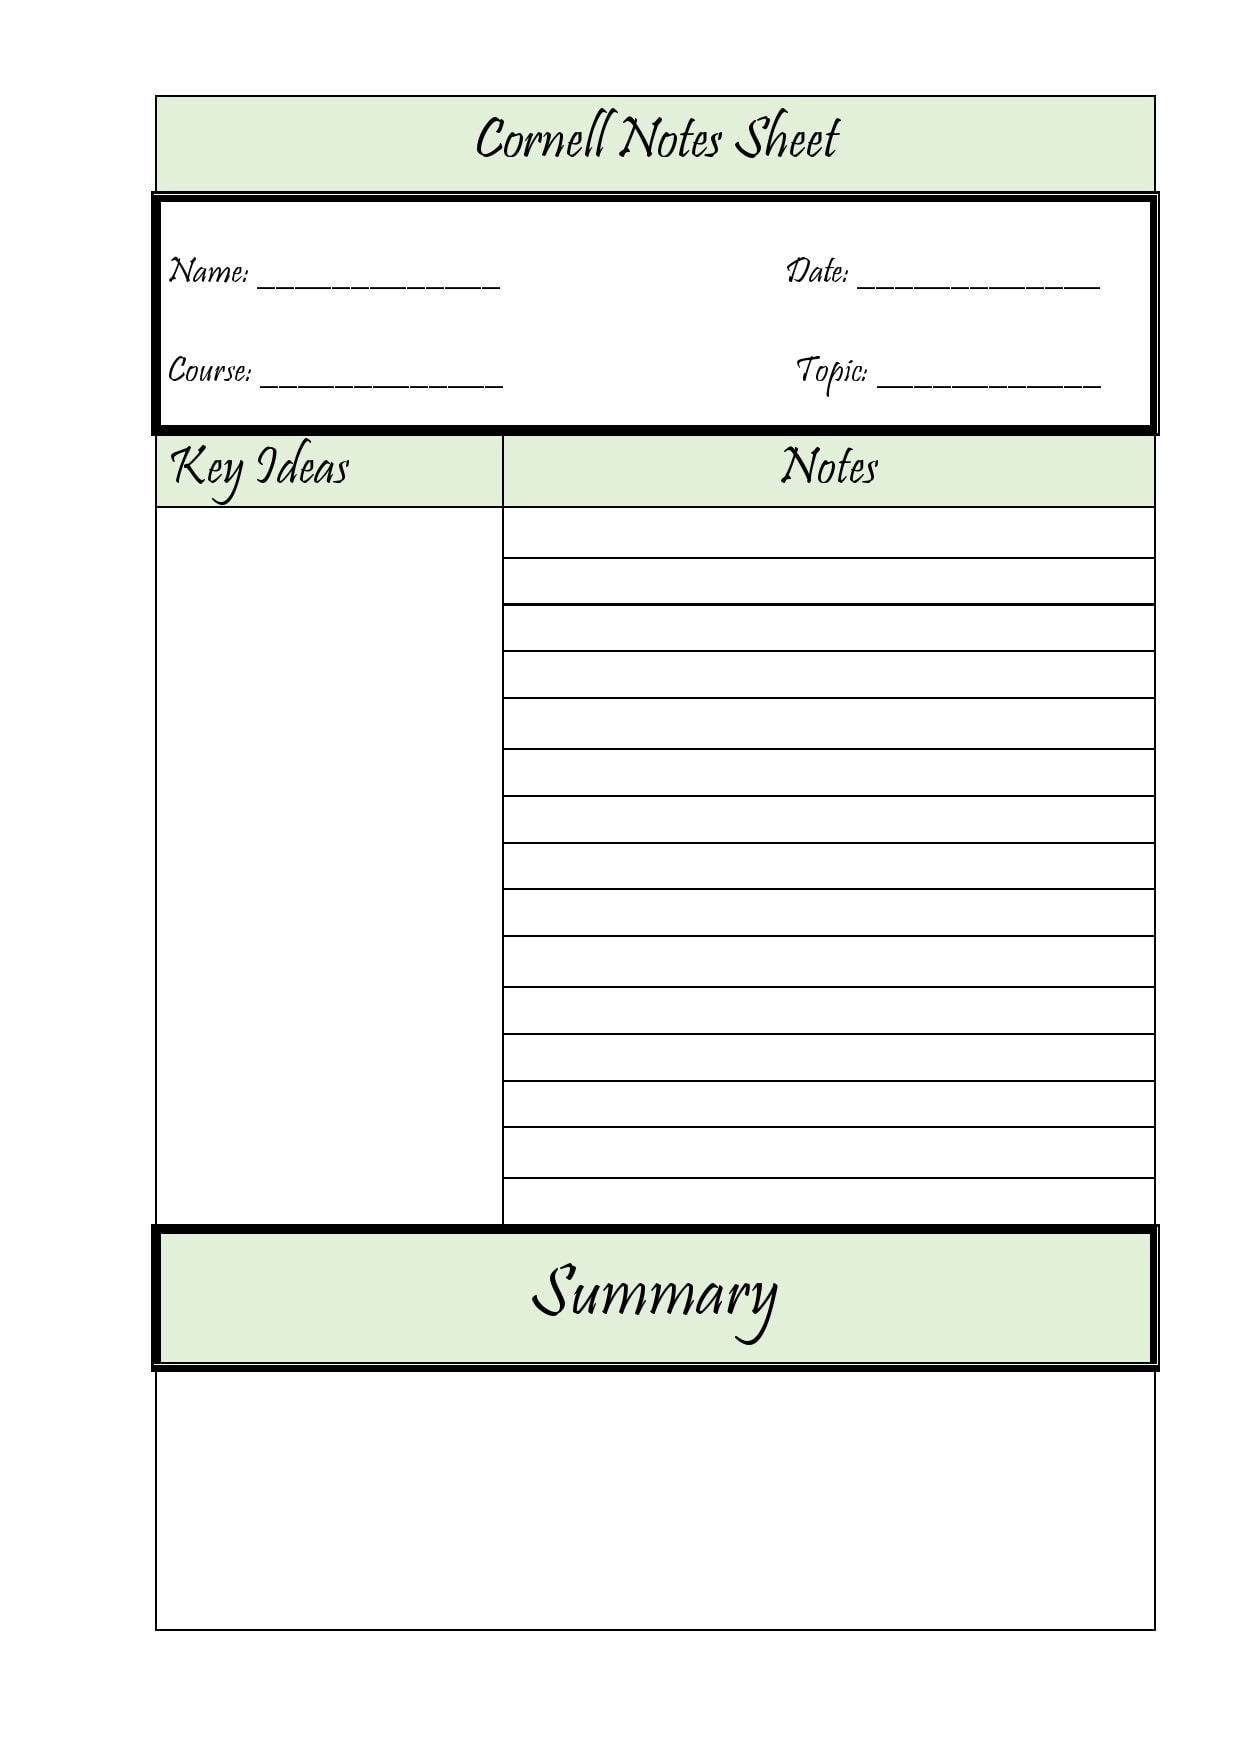 23 Printable Cornell Notes Templates [Free] - TemplateArchive In Cornell Notes Template Word Document